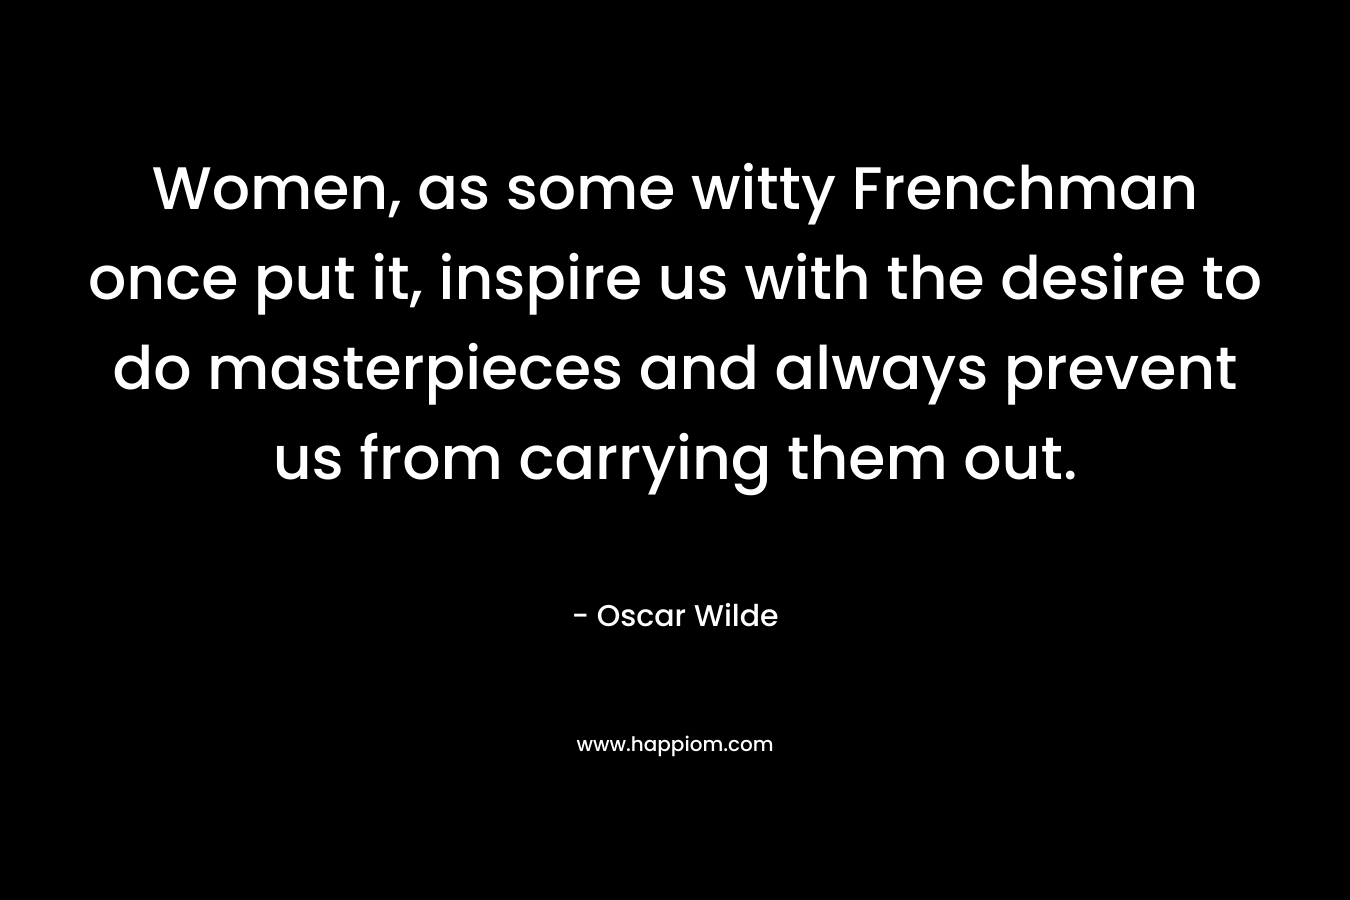 Women, as some witty Frenchman once put it, inspire us with the desire to do masterpieces and always prevent us from carrying them out.